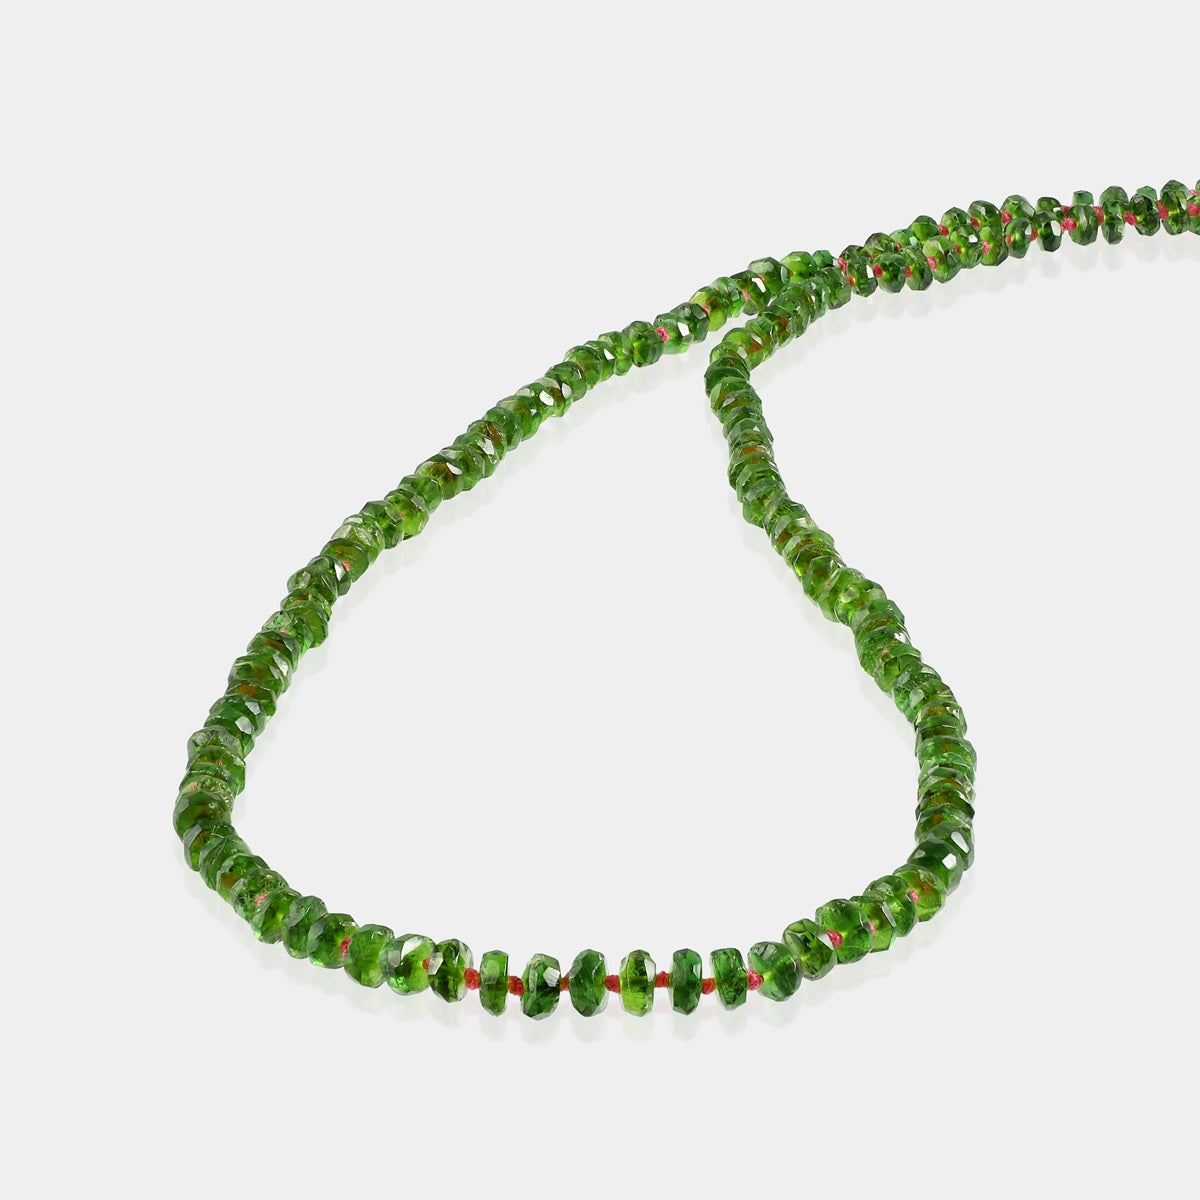 Close-up of faceted rondelle Chrome Diopside gemstone beads on necklace